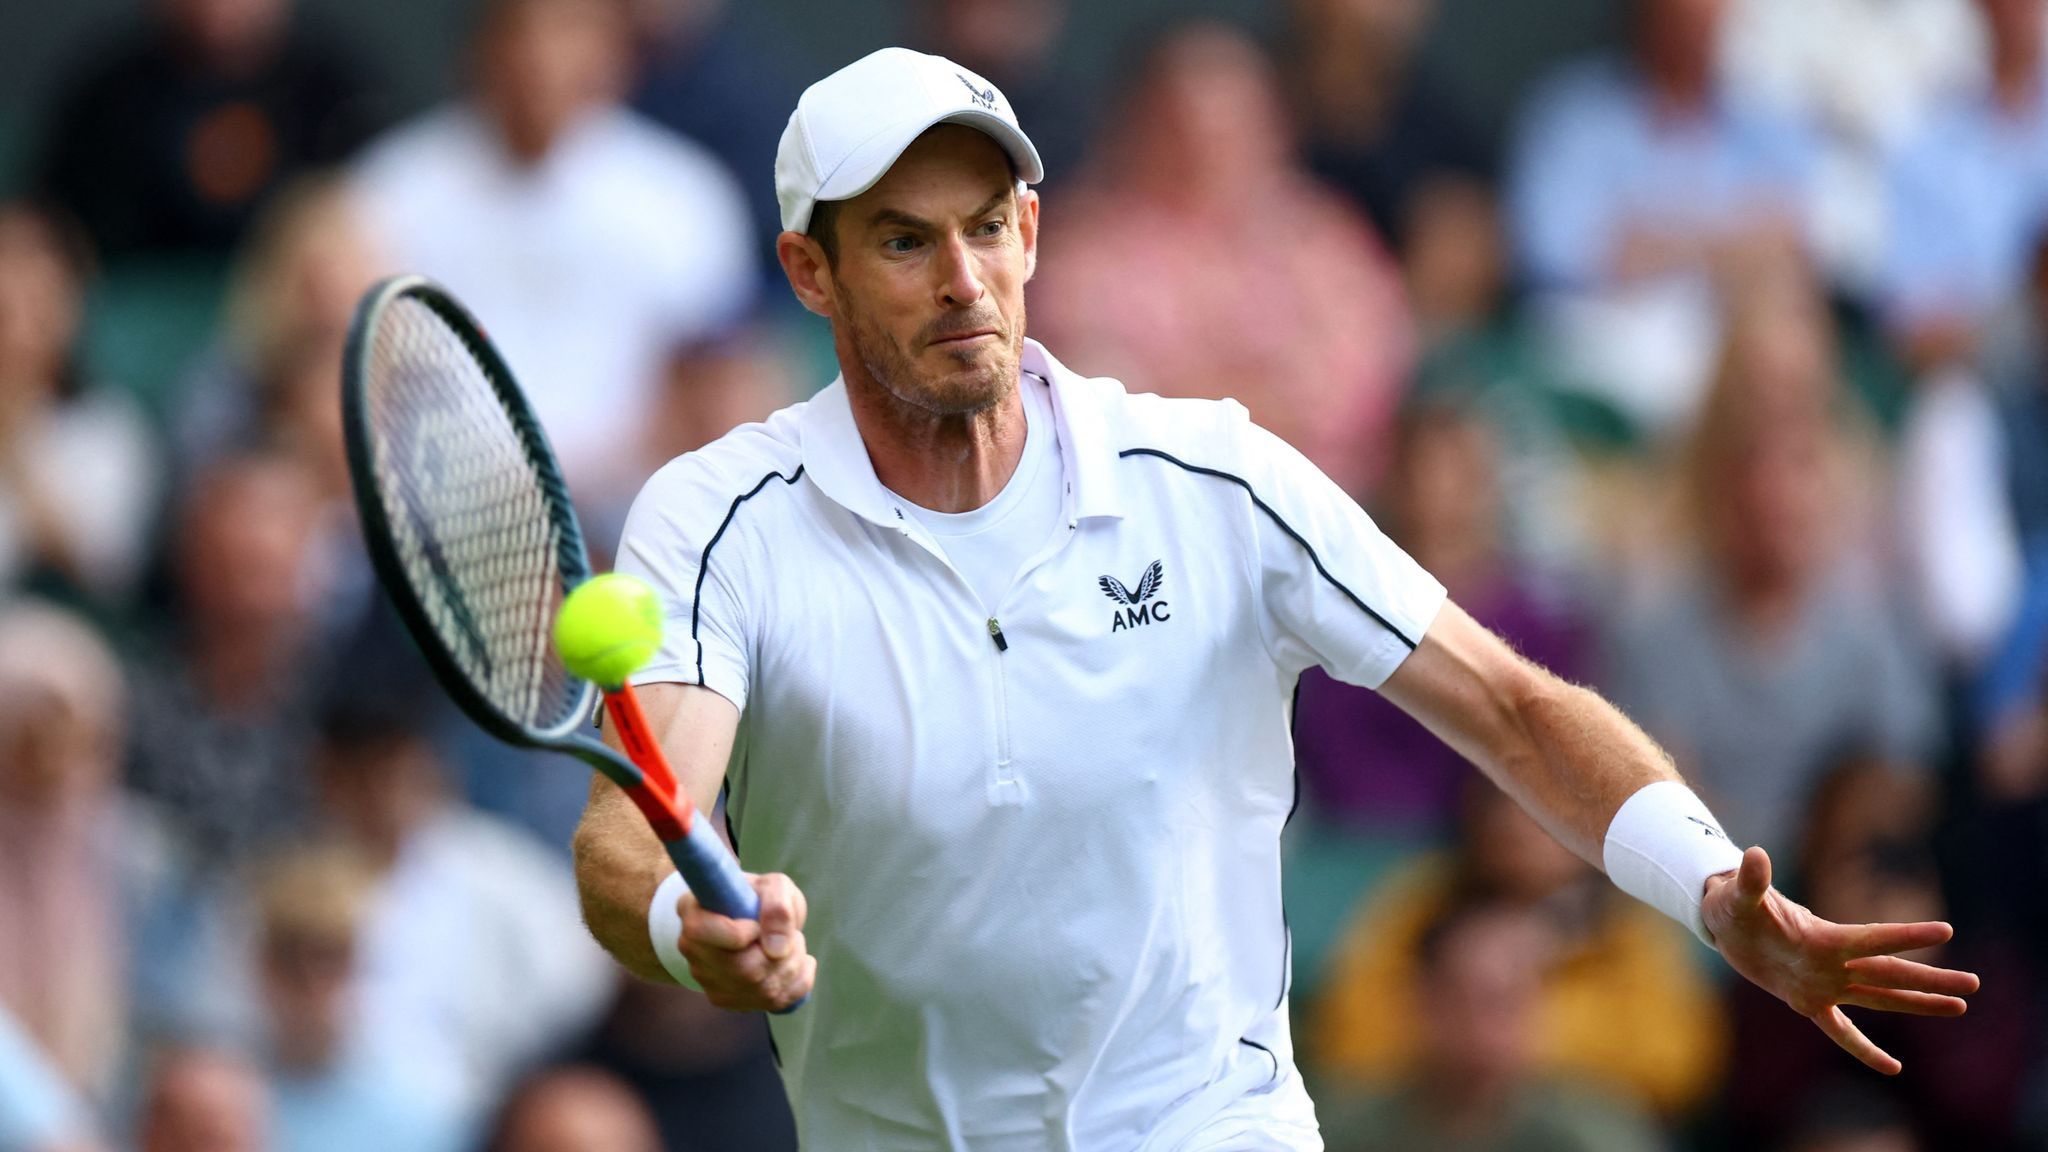 How to watch for free Andy Murray vs John Isner Wimbledon 2022 and on TV, @06:45 PM